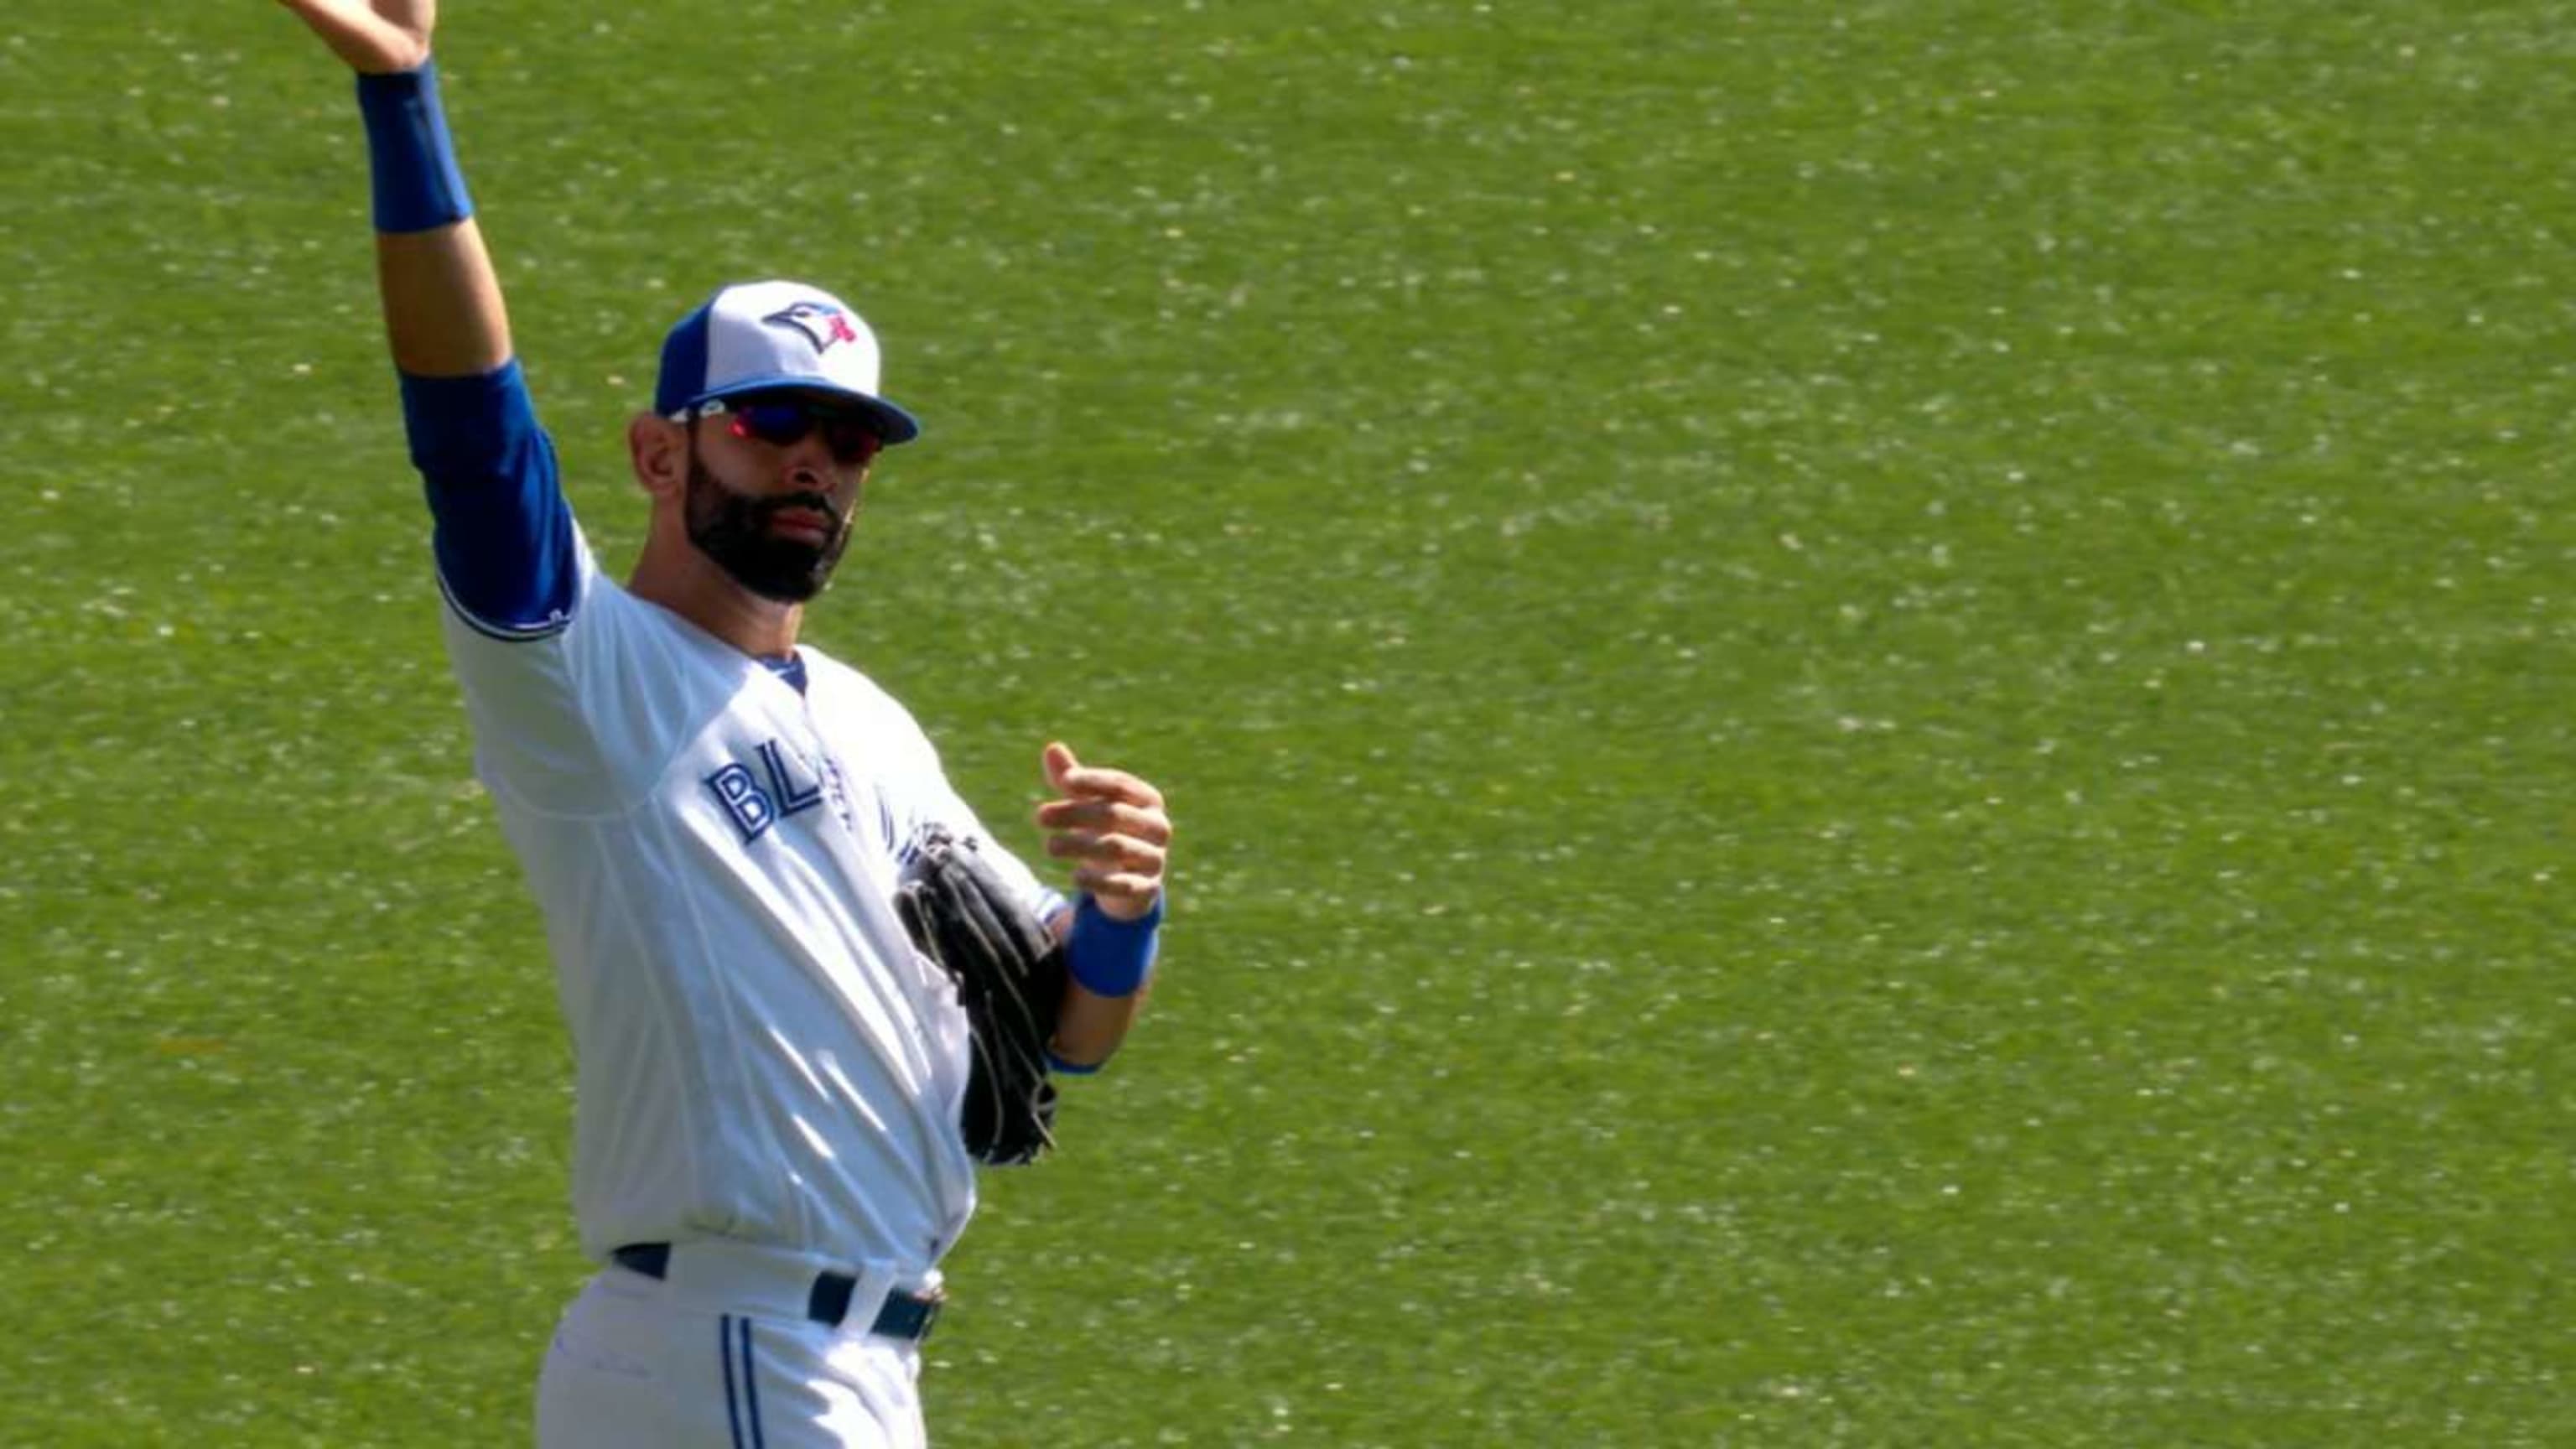 Blue Jays: Jose Bautista keeps the dream alive in Olympic qualifier